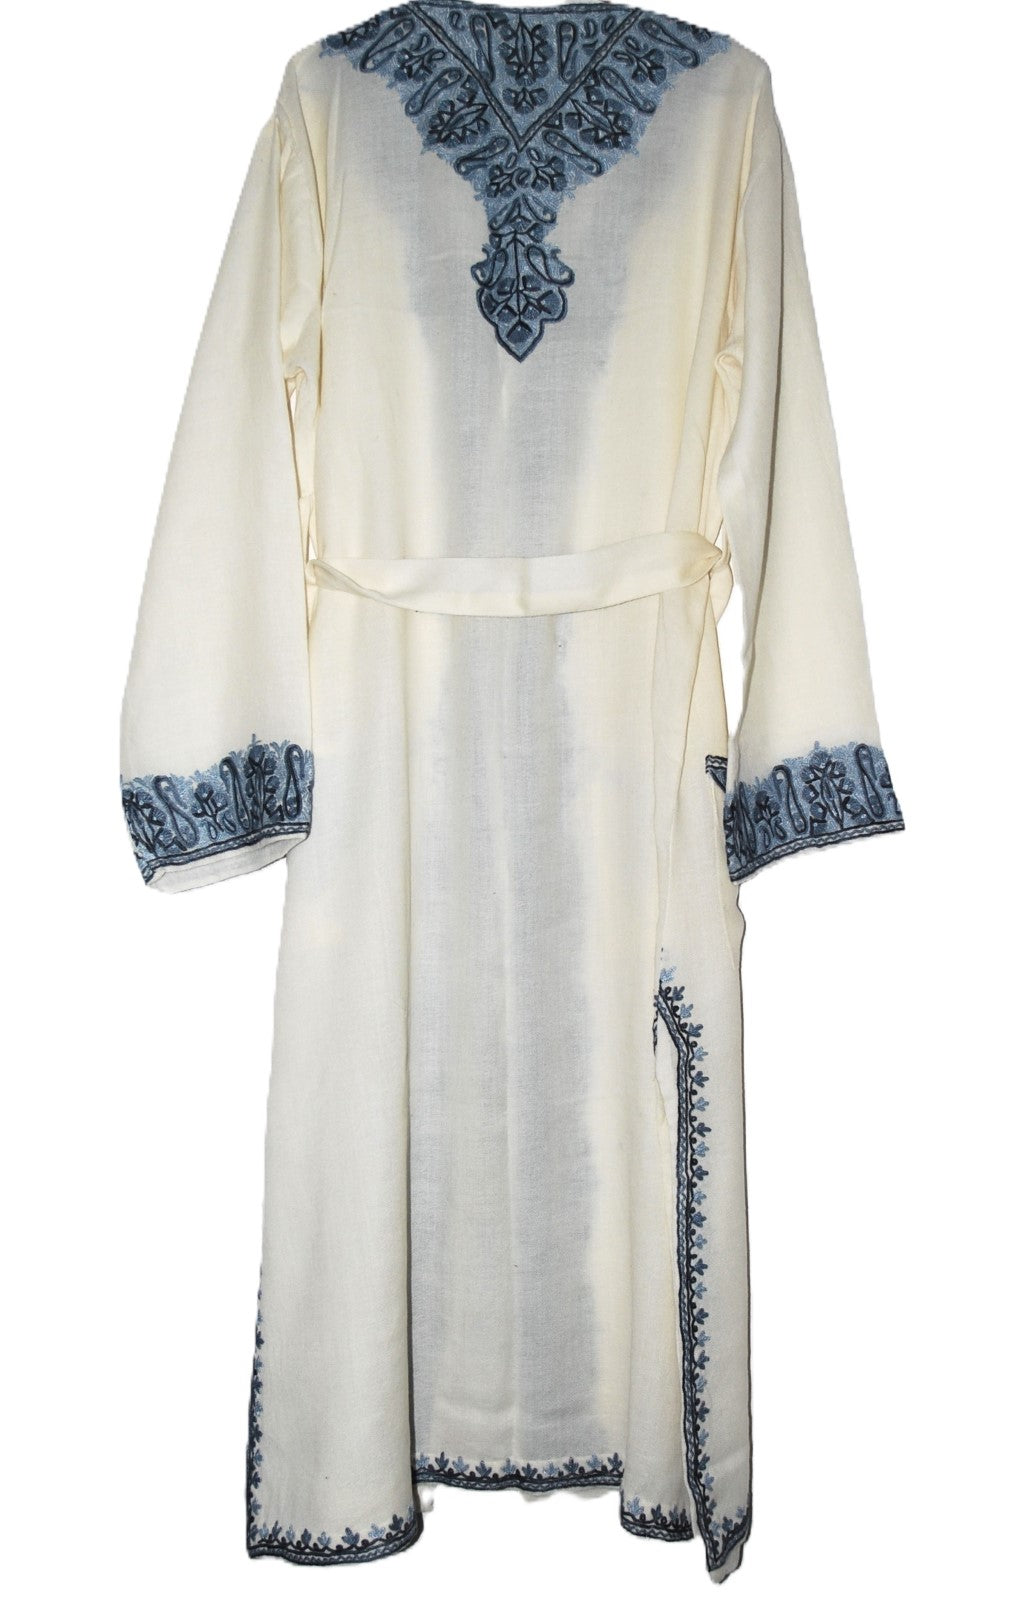 Embroidered Woolen Dressing Gown Ladies, Grey on White  #WG-021